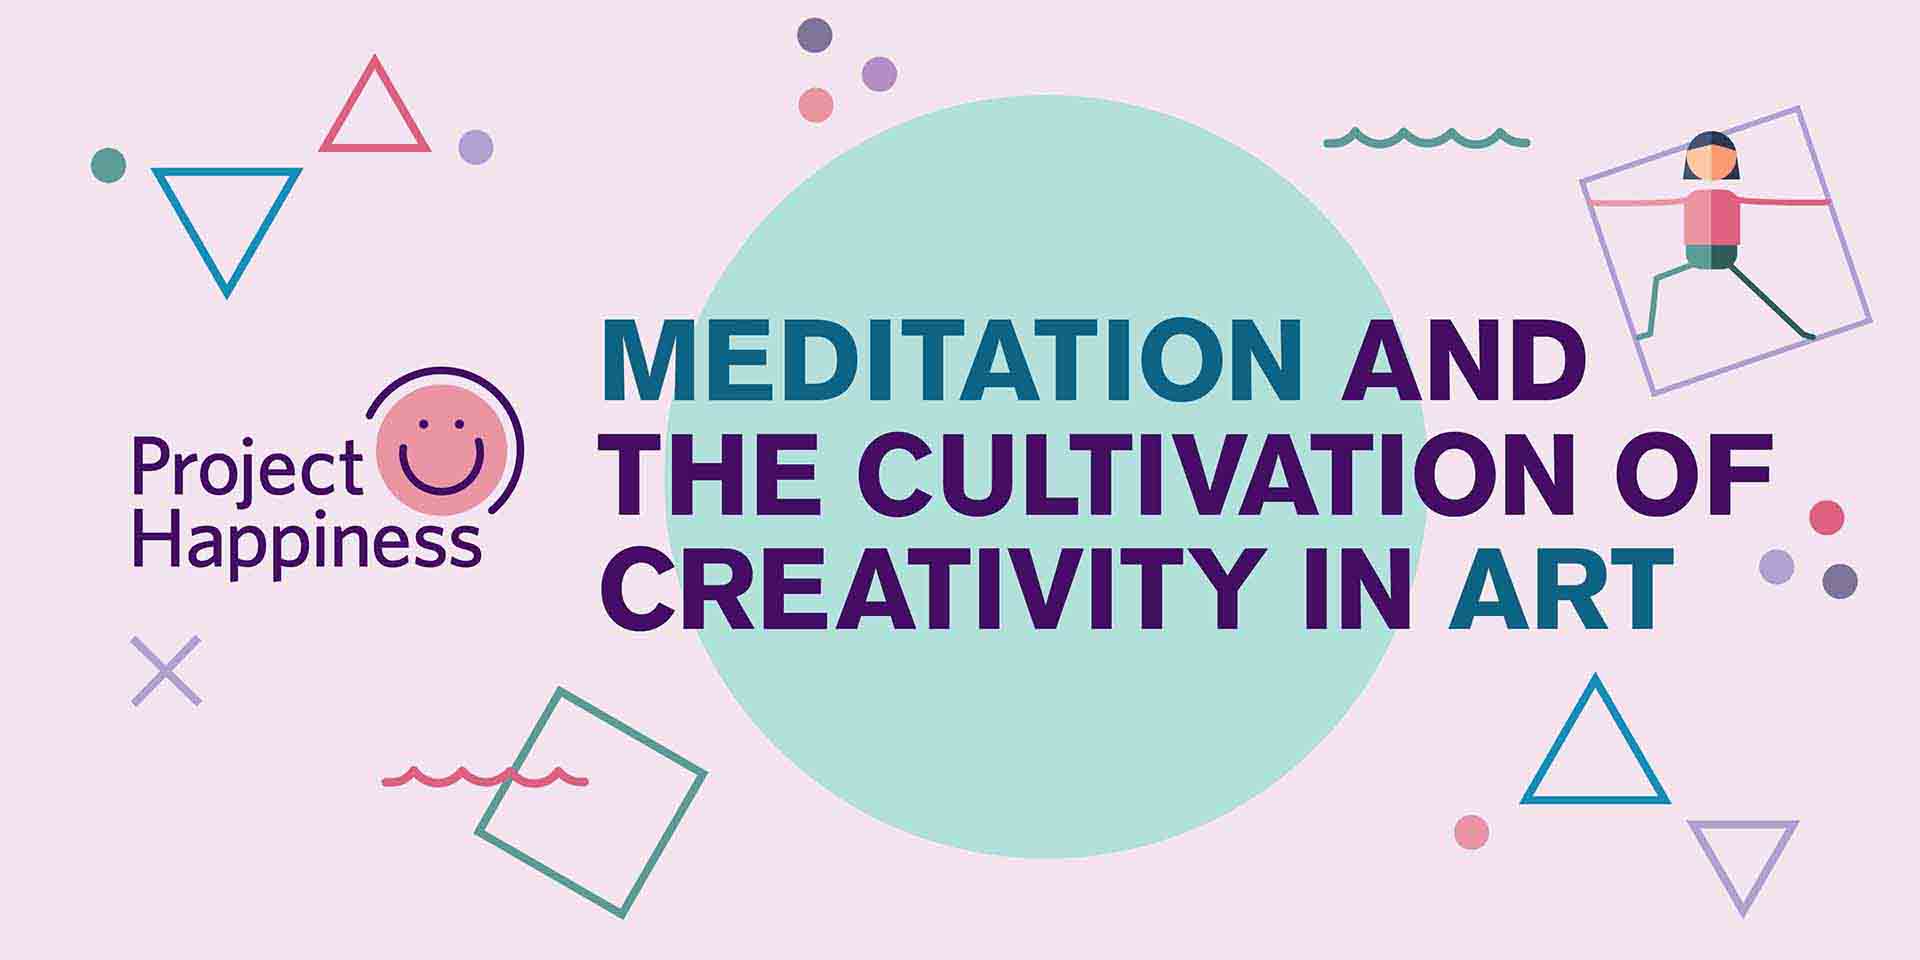 Meditation and the Cultivation of Creativity in Art